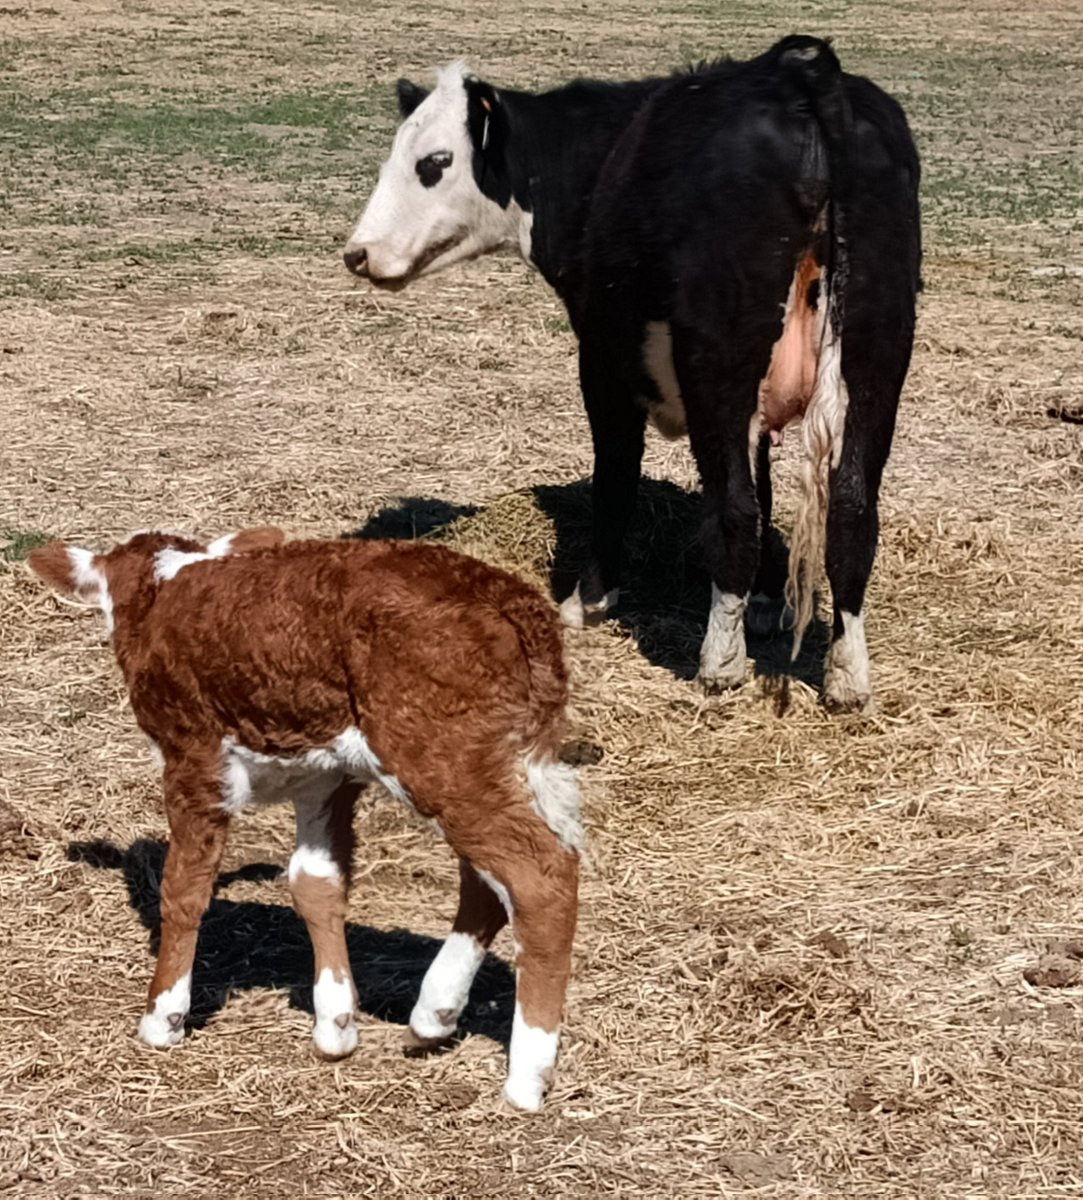 #BlameItOnTheHereford #BaldyPorn

He may be a true featherneck but he is one leggy sumbitch born to a first calf heifer with a ton of milk